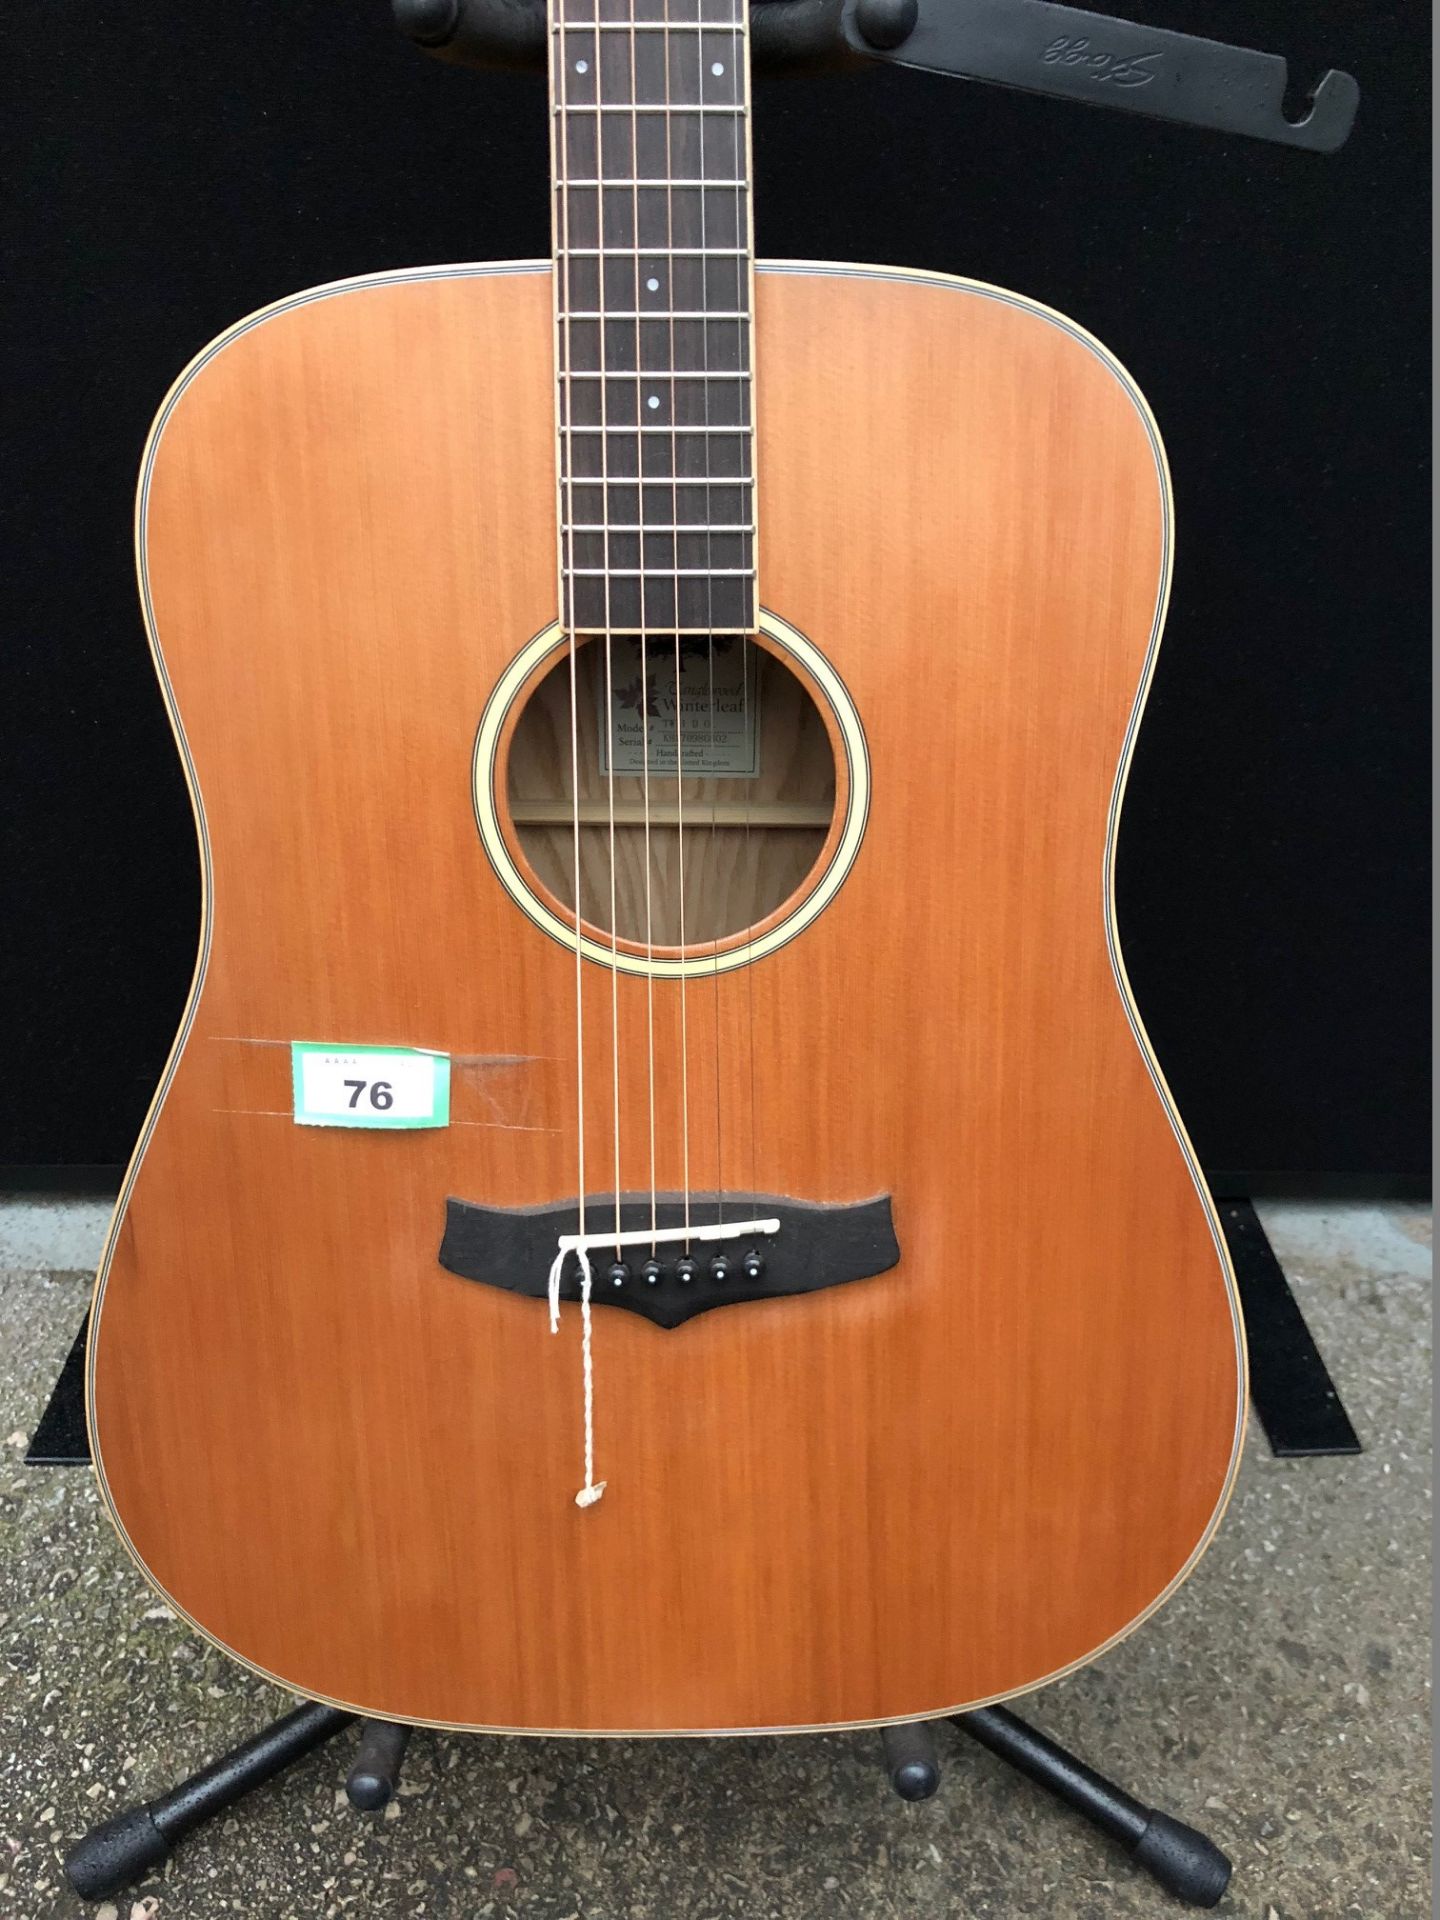 Tanglewood TW11D OL Olive Wood Acoustic Guitar (Brand New Ex Display - RRP £299.00) - Image 2 of 6